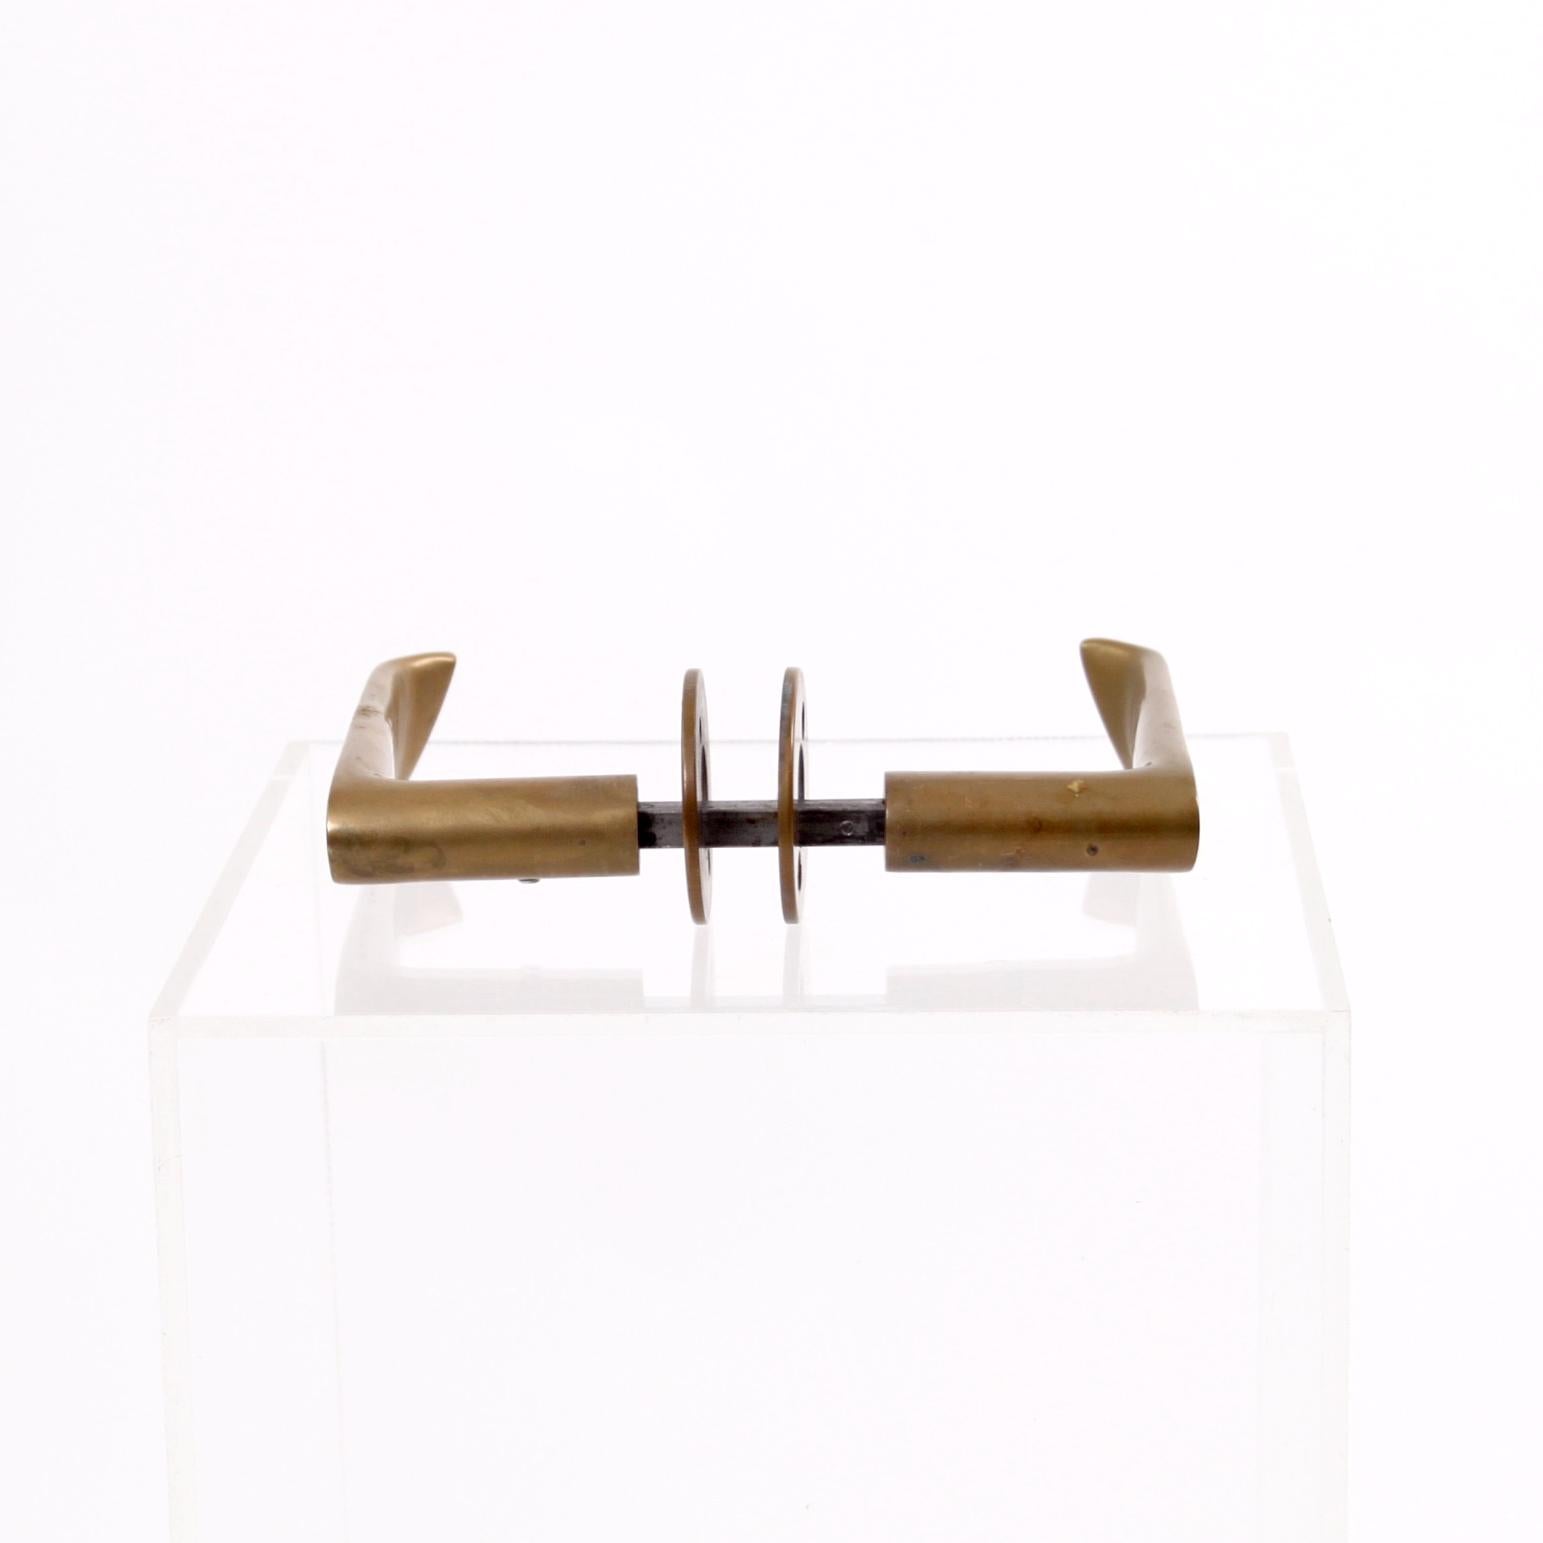 A collection of eight sculptural Alvar Aalto door handles.

The handles are designed in the 1950s and made of solid brass. 

They are in excellent condition with patina.